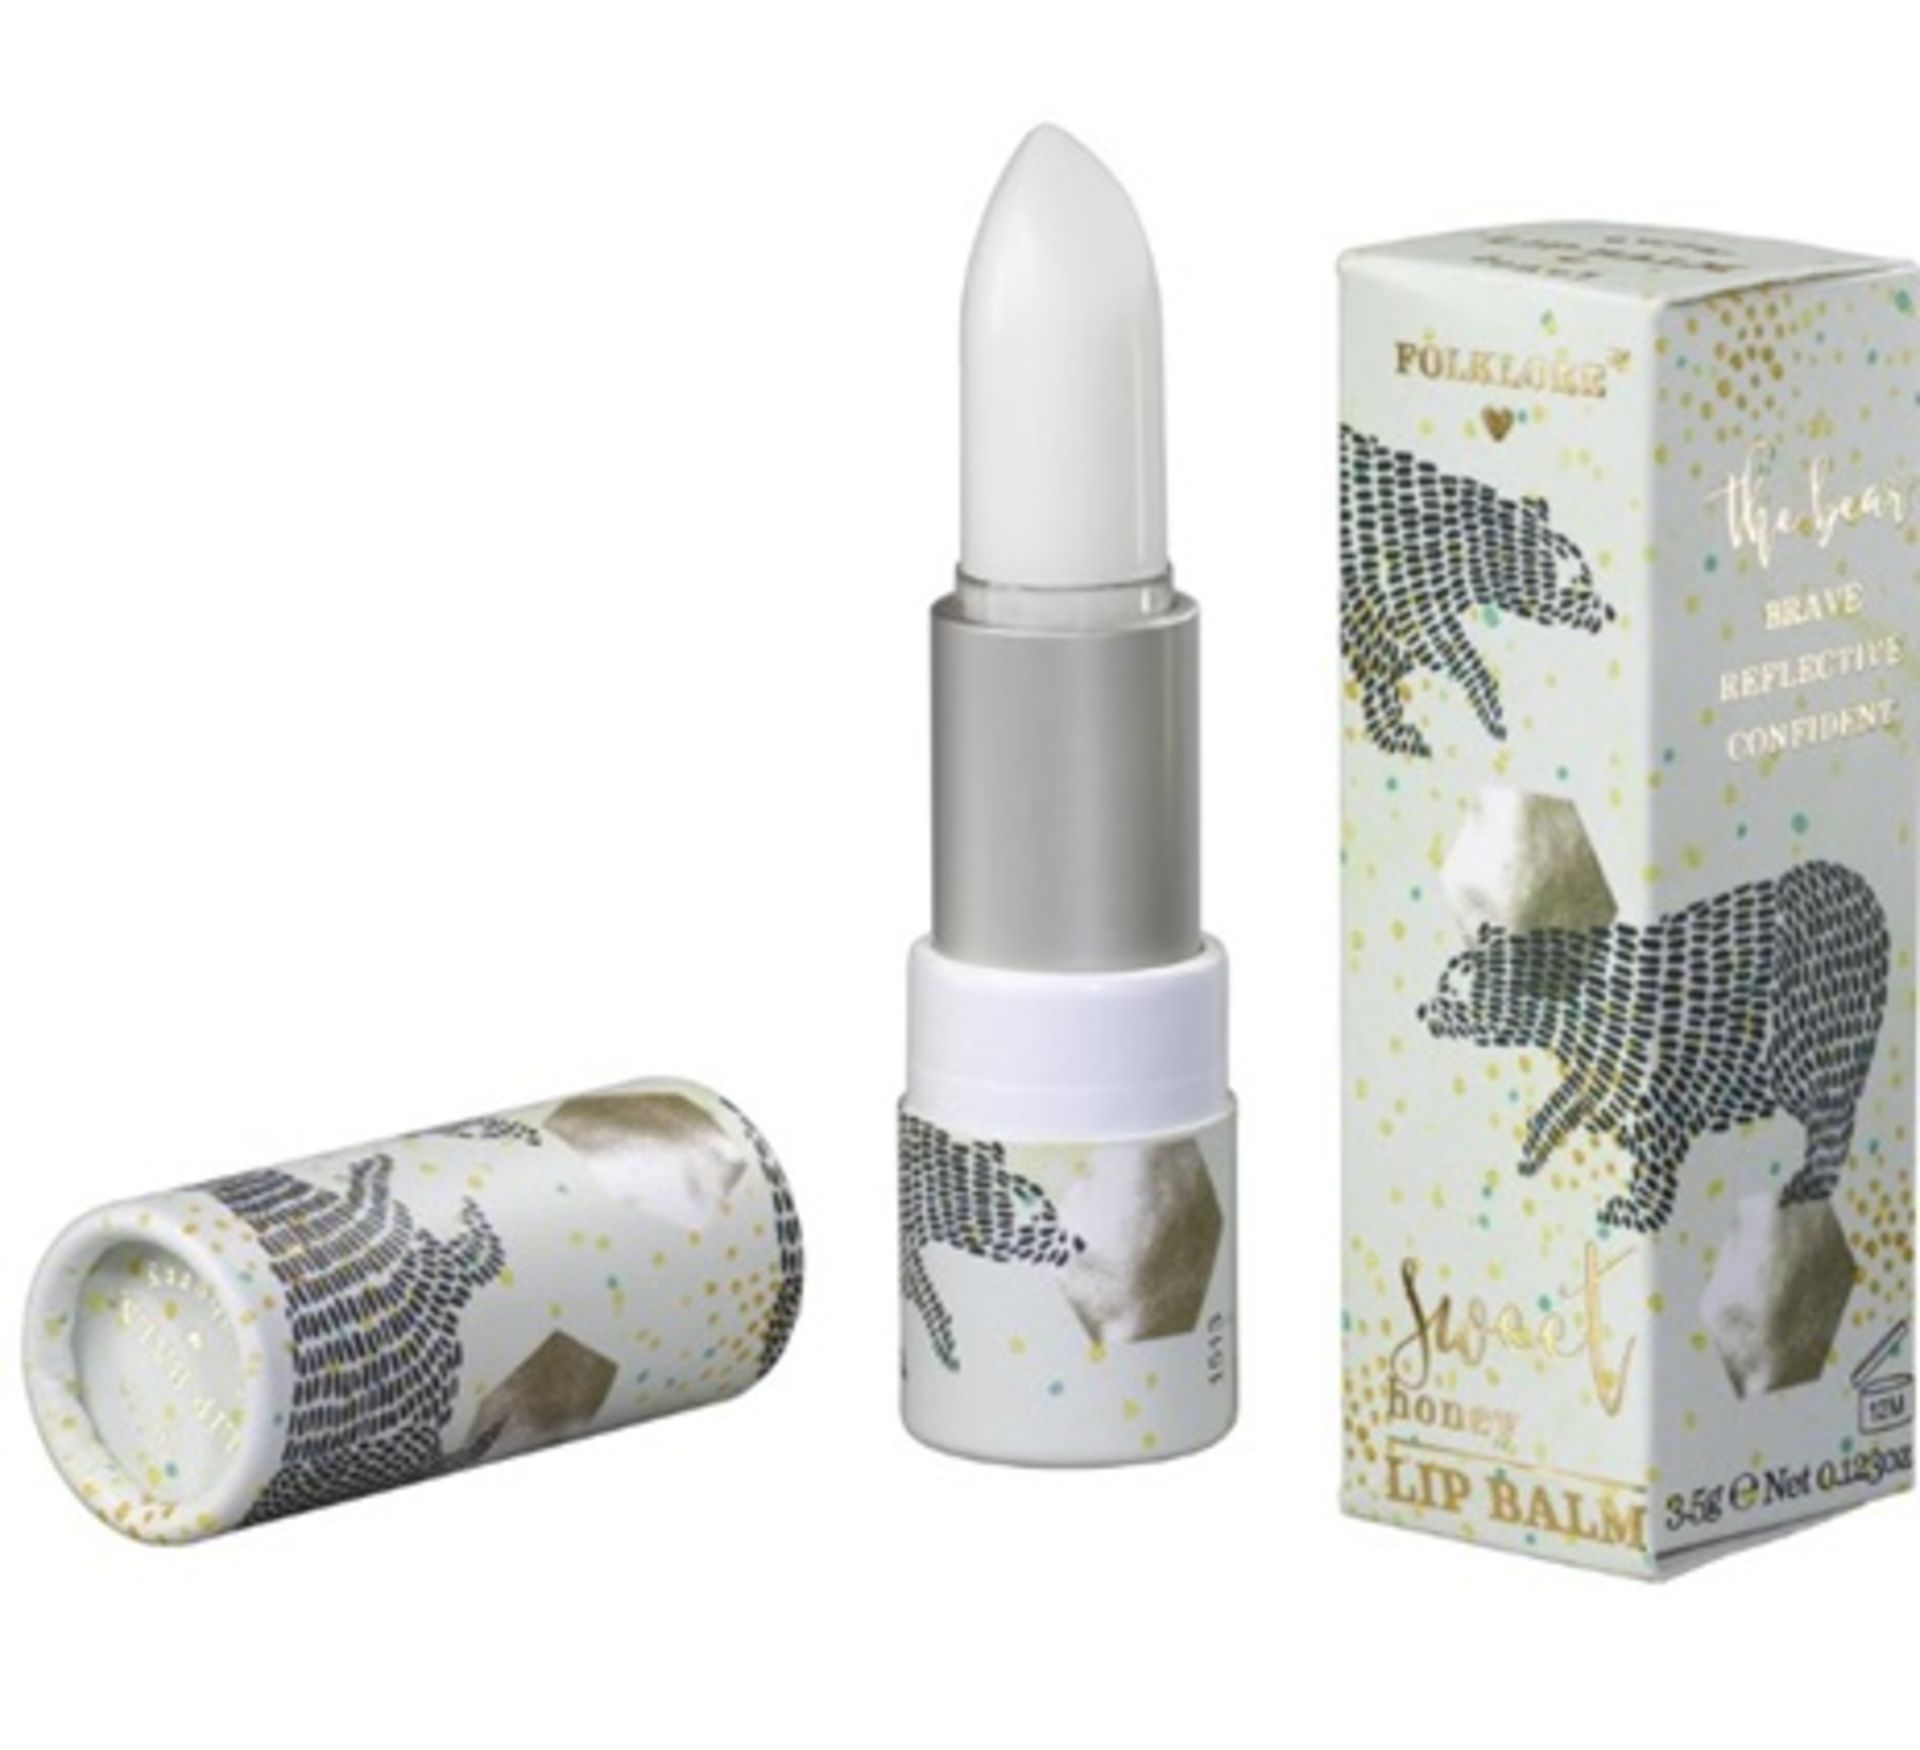 100 x Various Folklore Lip Balm | 3.5g | Total RRP £599 - Image 4 of 4